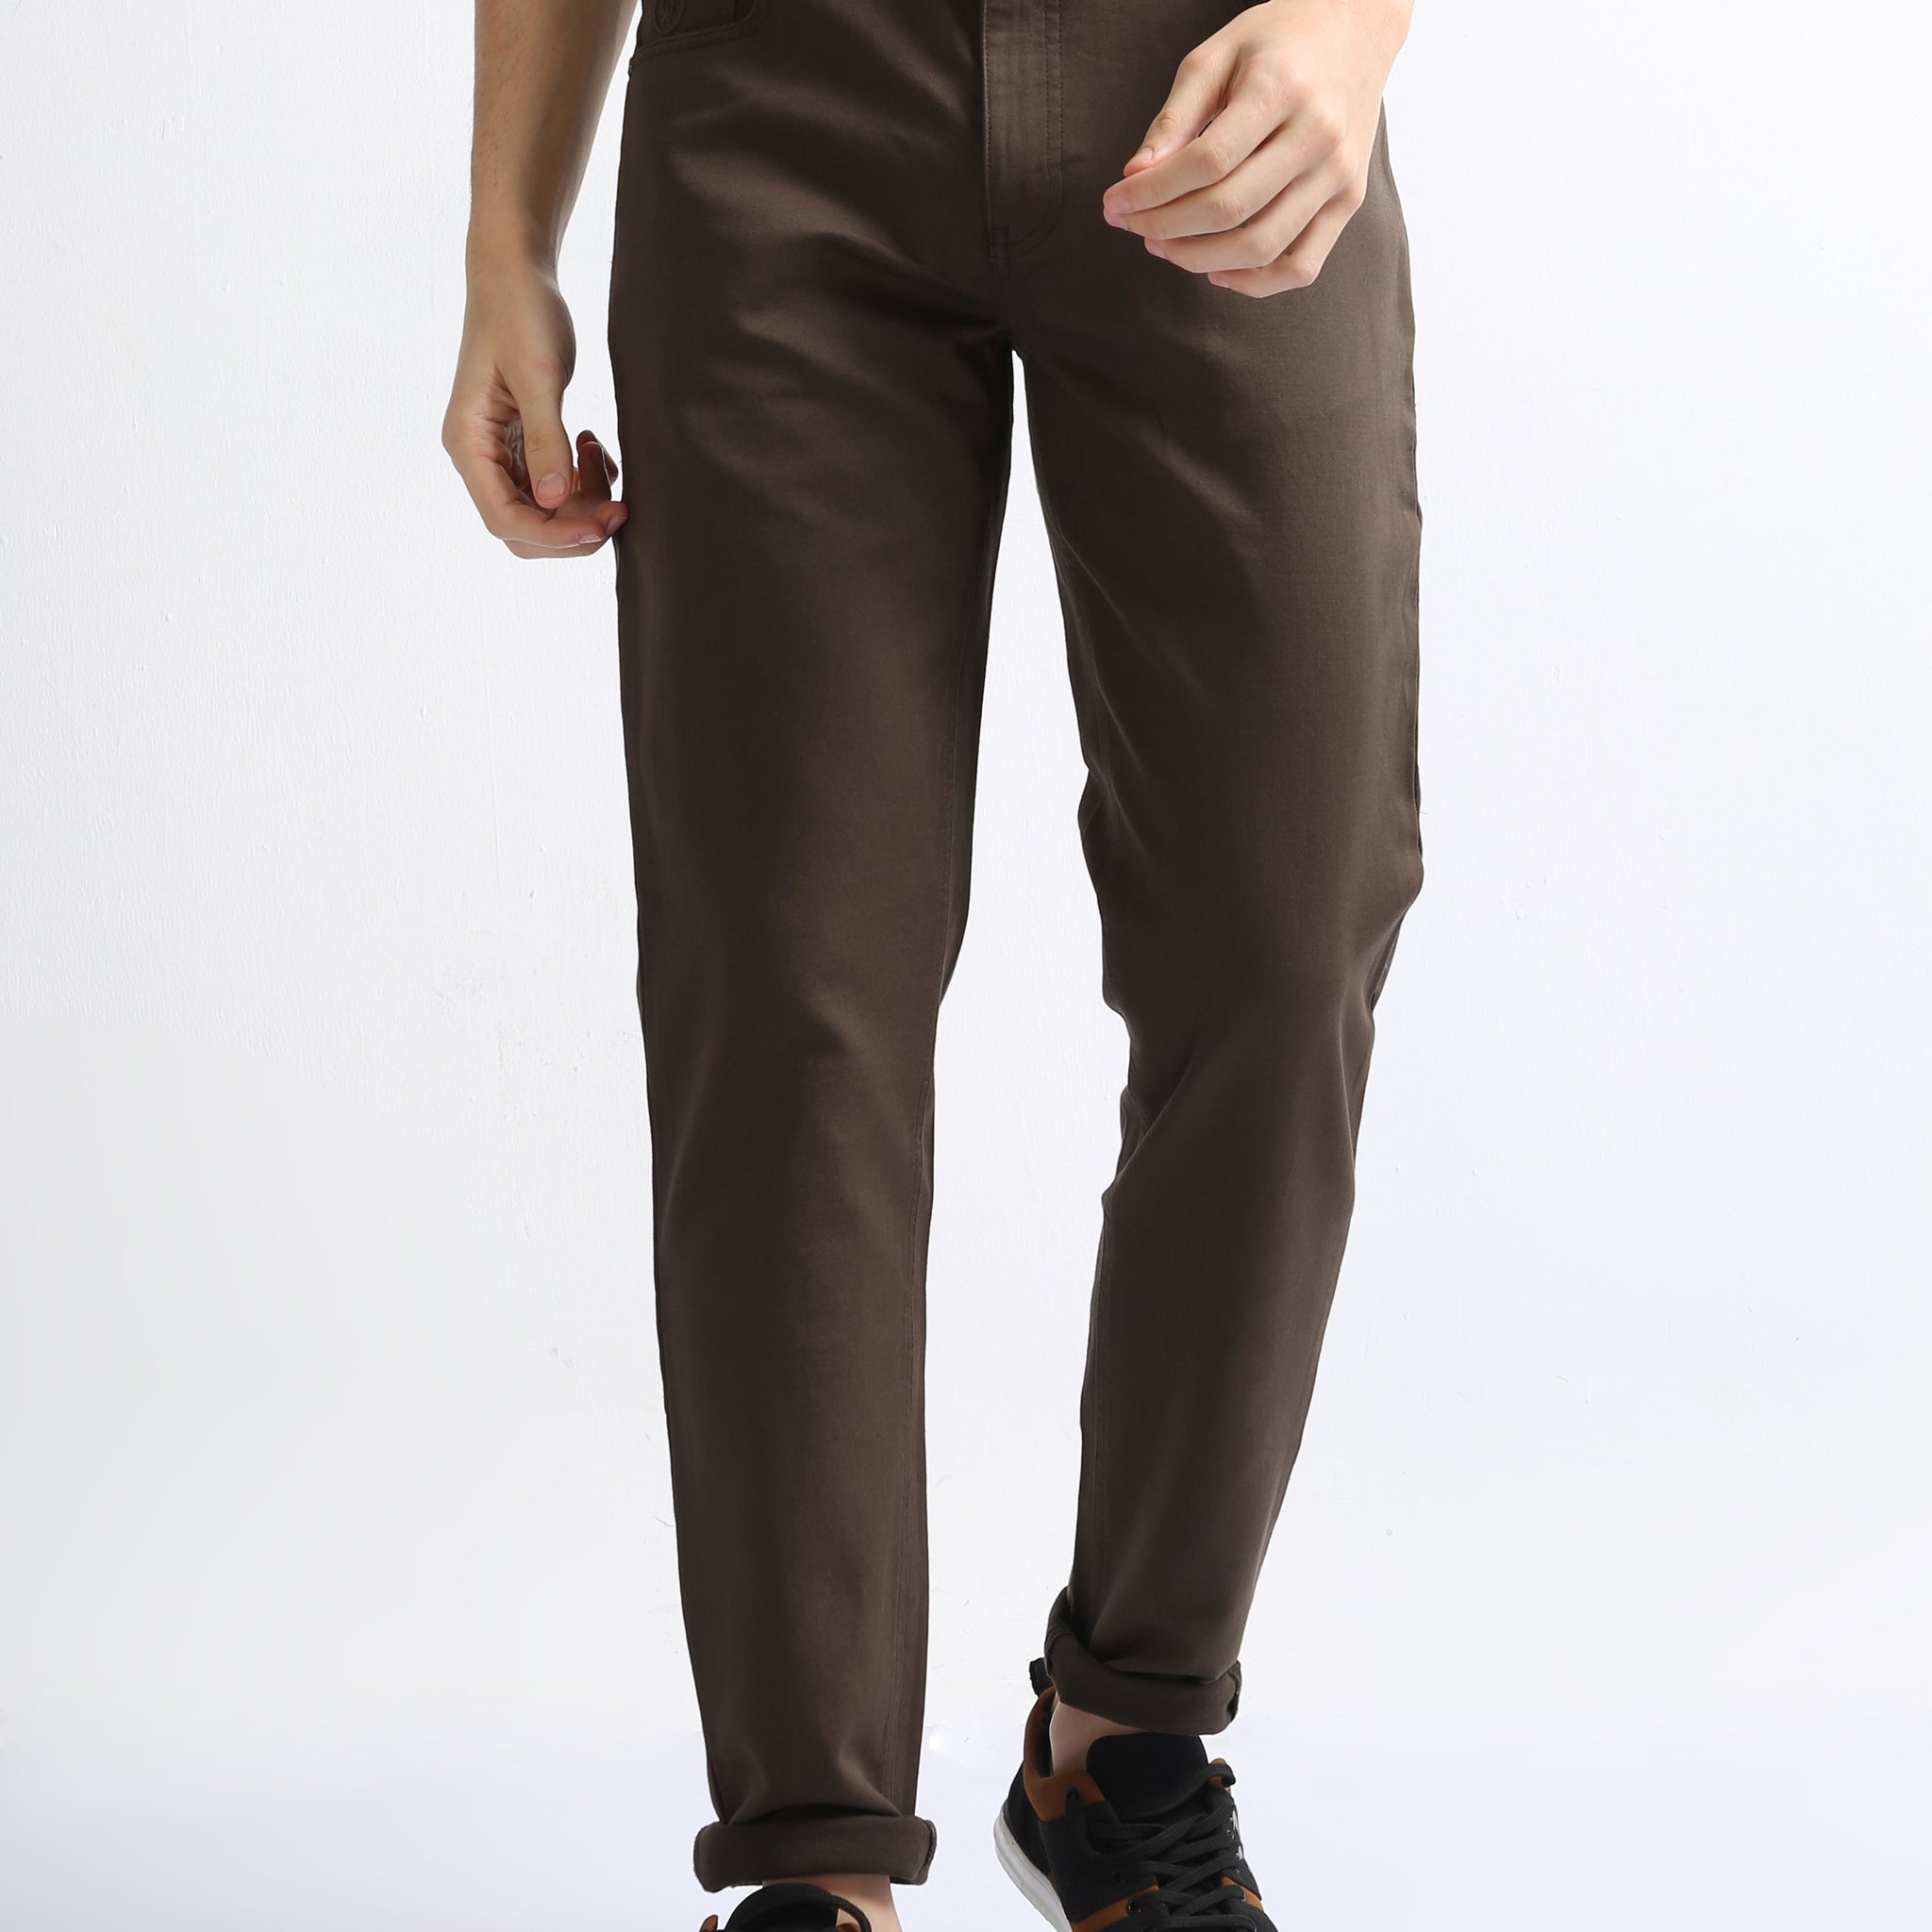 Brown Casual Cotton Stretch Men's Trousers